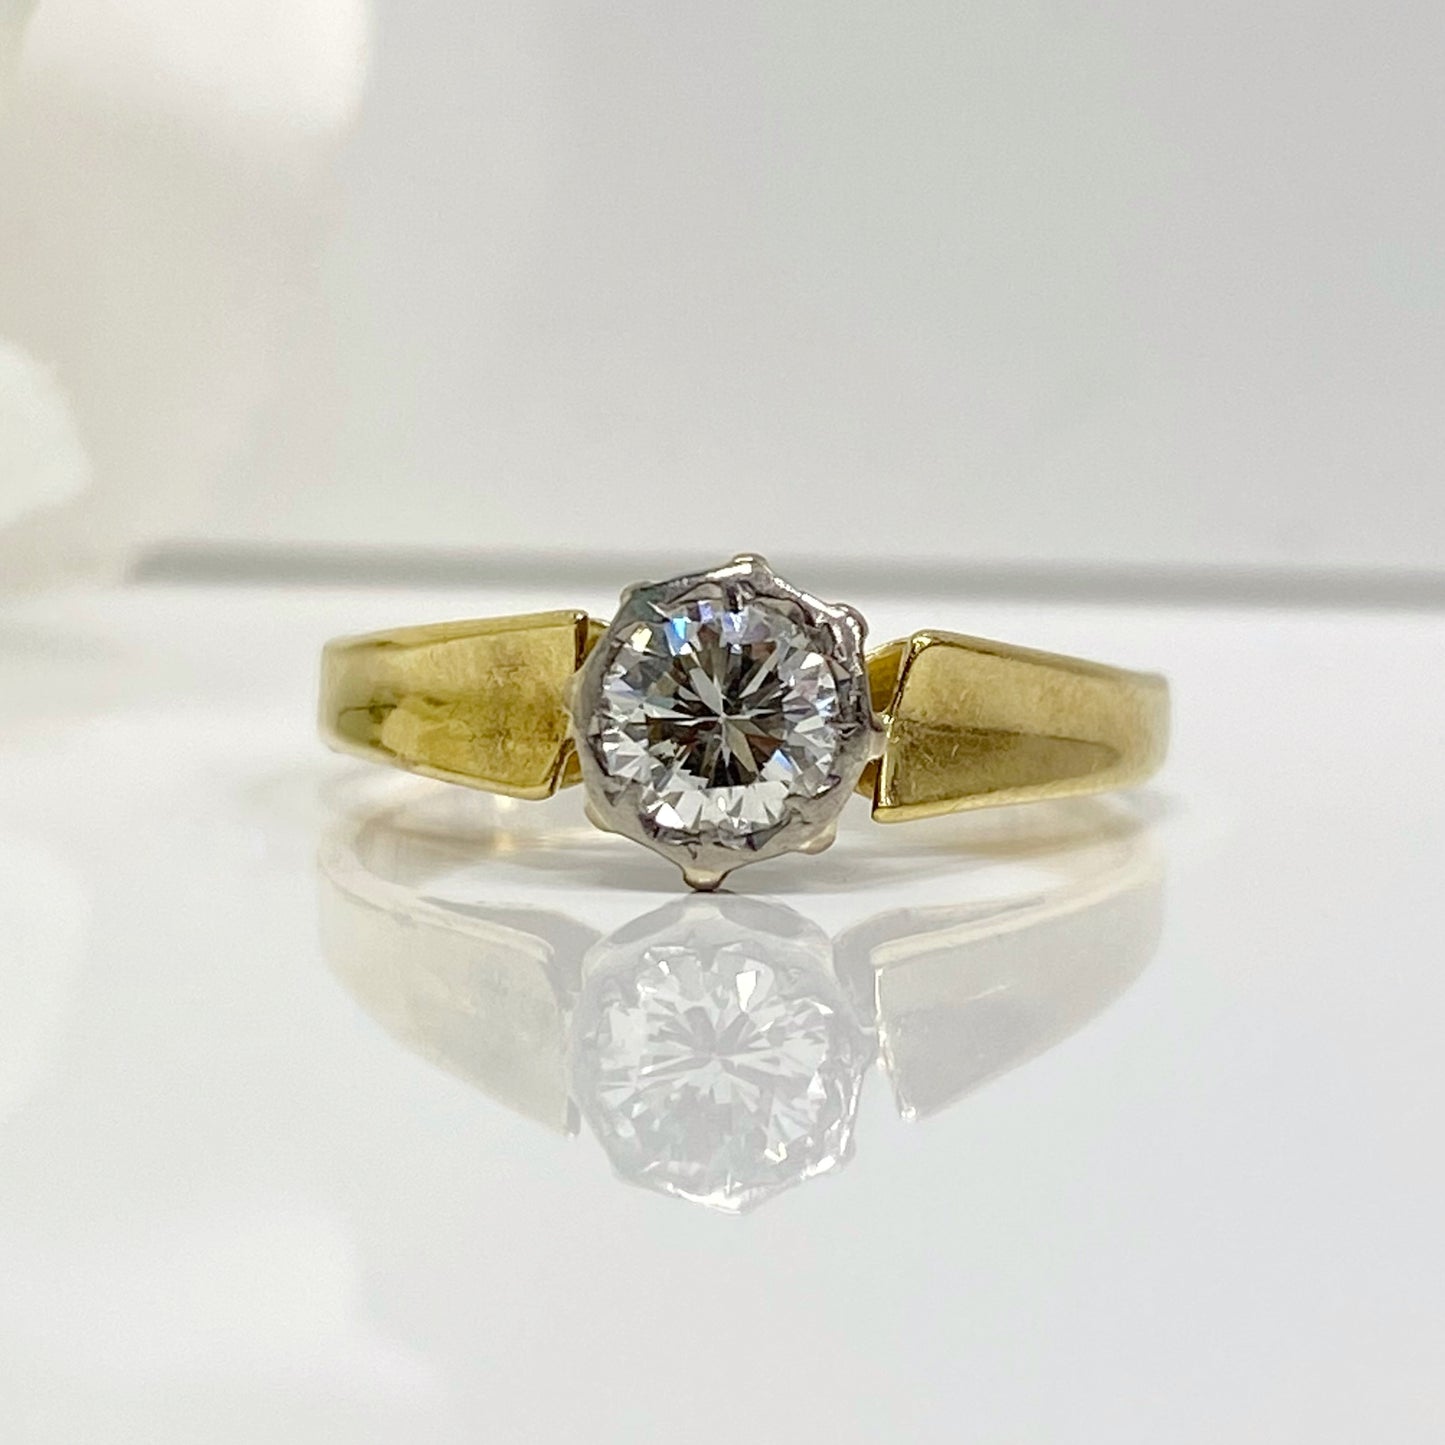 Vintage 18ct Yellow Gold And Diamond Solitaire Ring - SIZE K